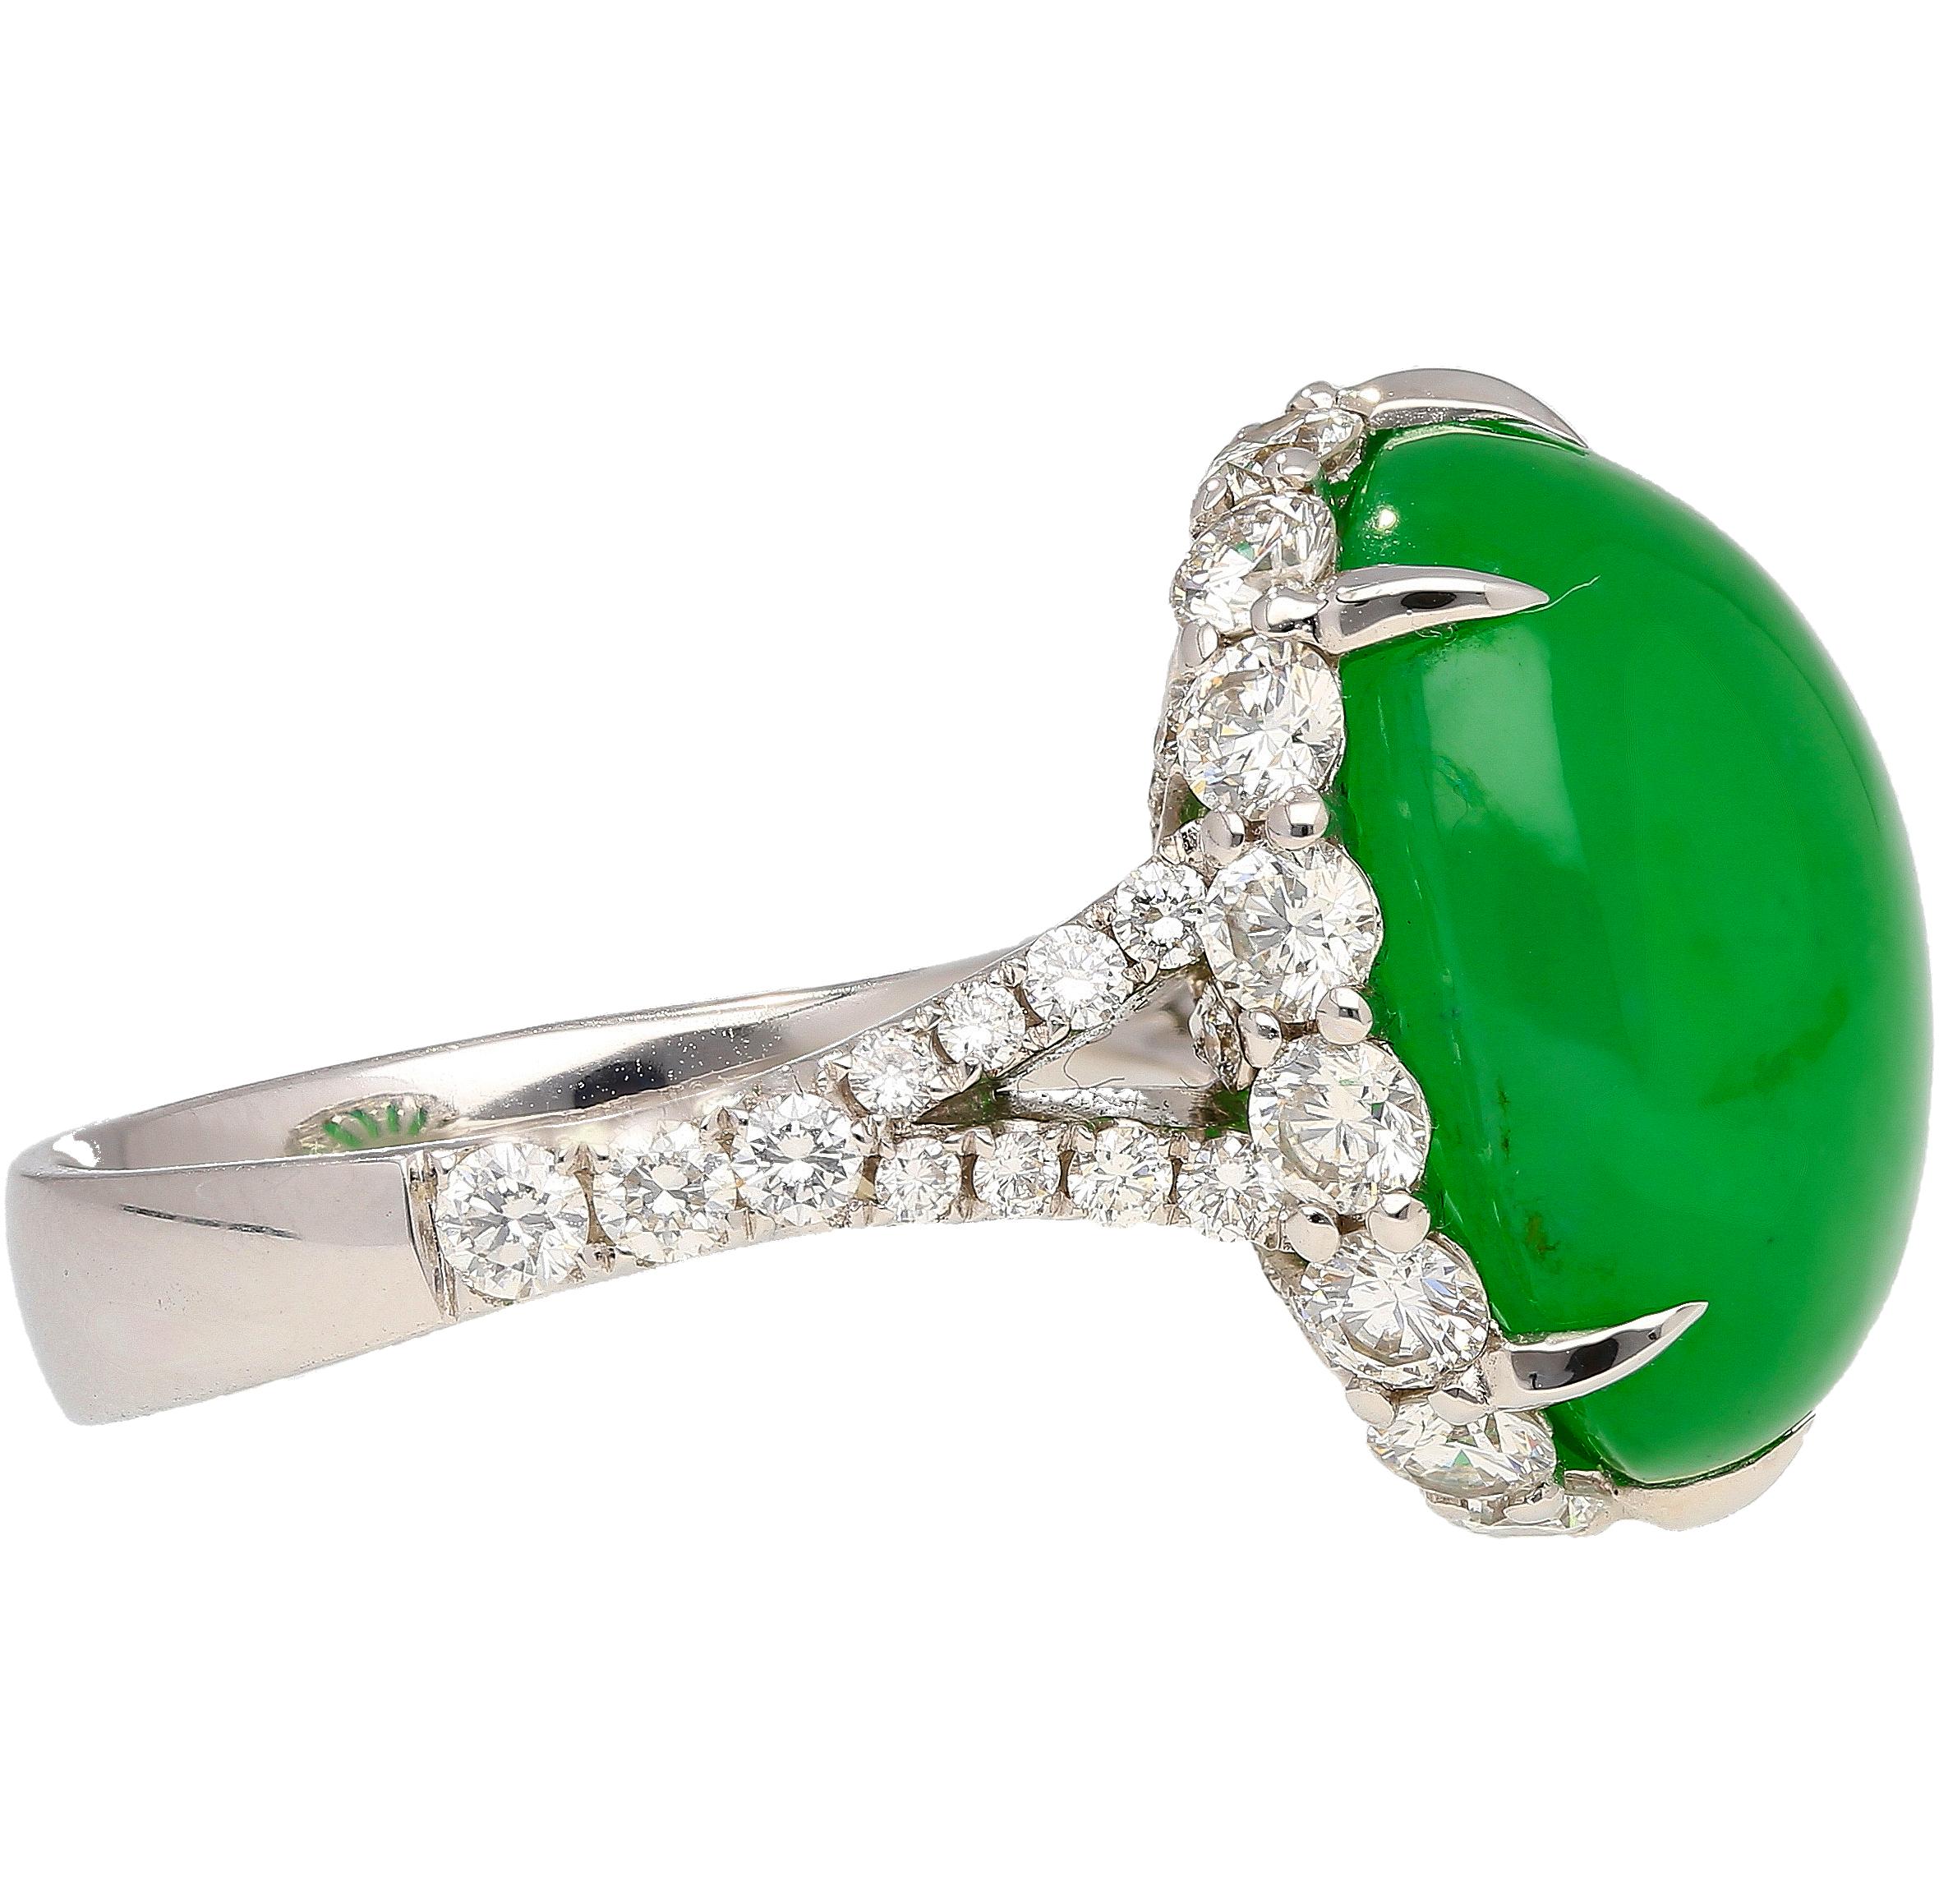 Women's 17.86 Carat Oval Cut Jadeite Jade and Diamond Ring in 18K White Gold For Sale